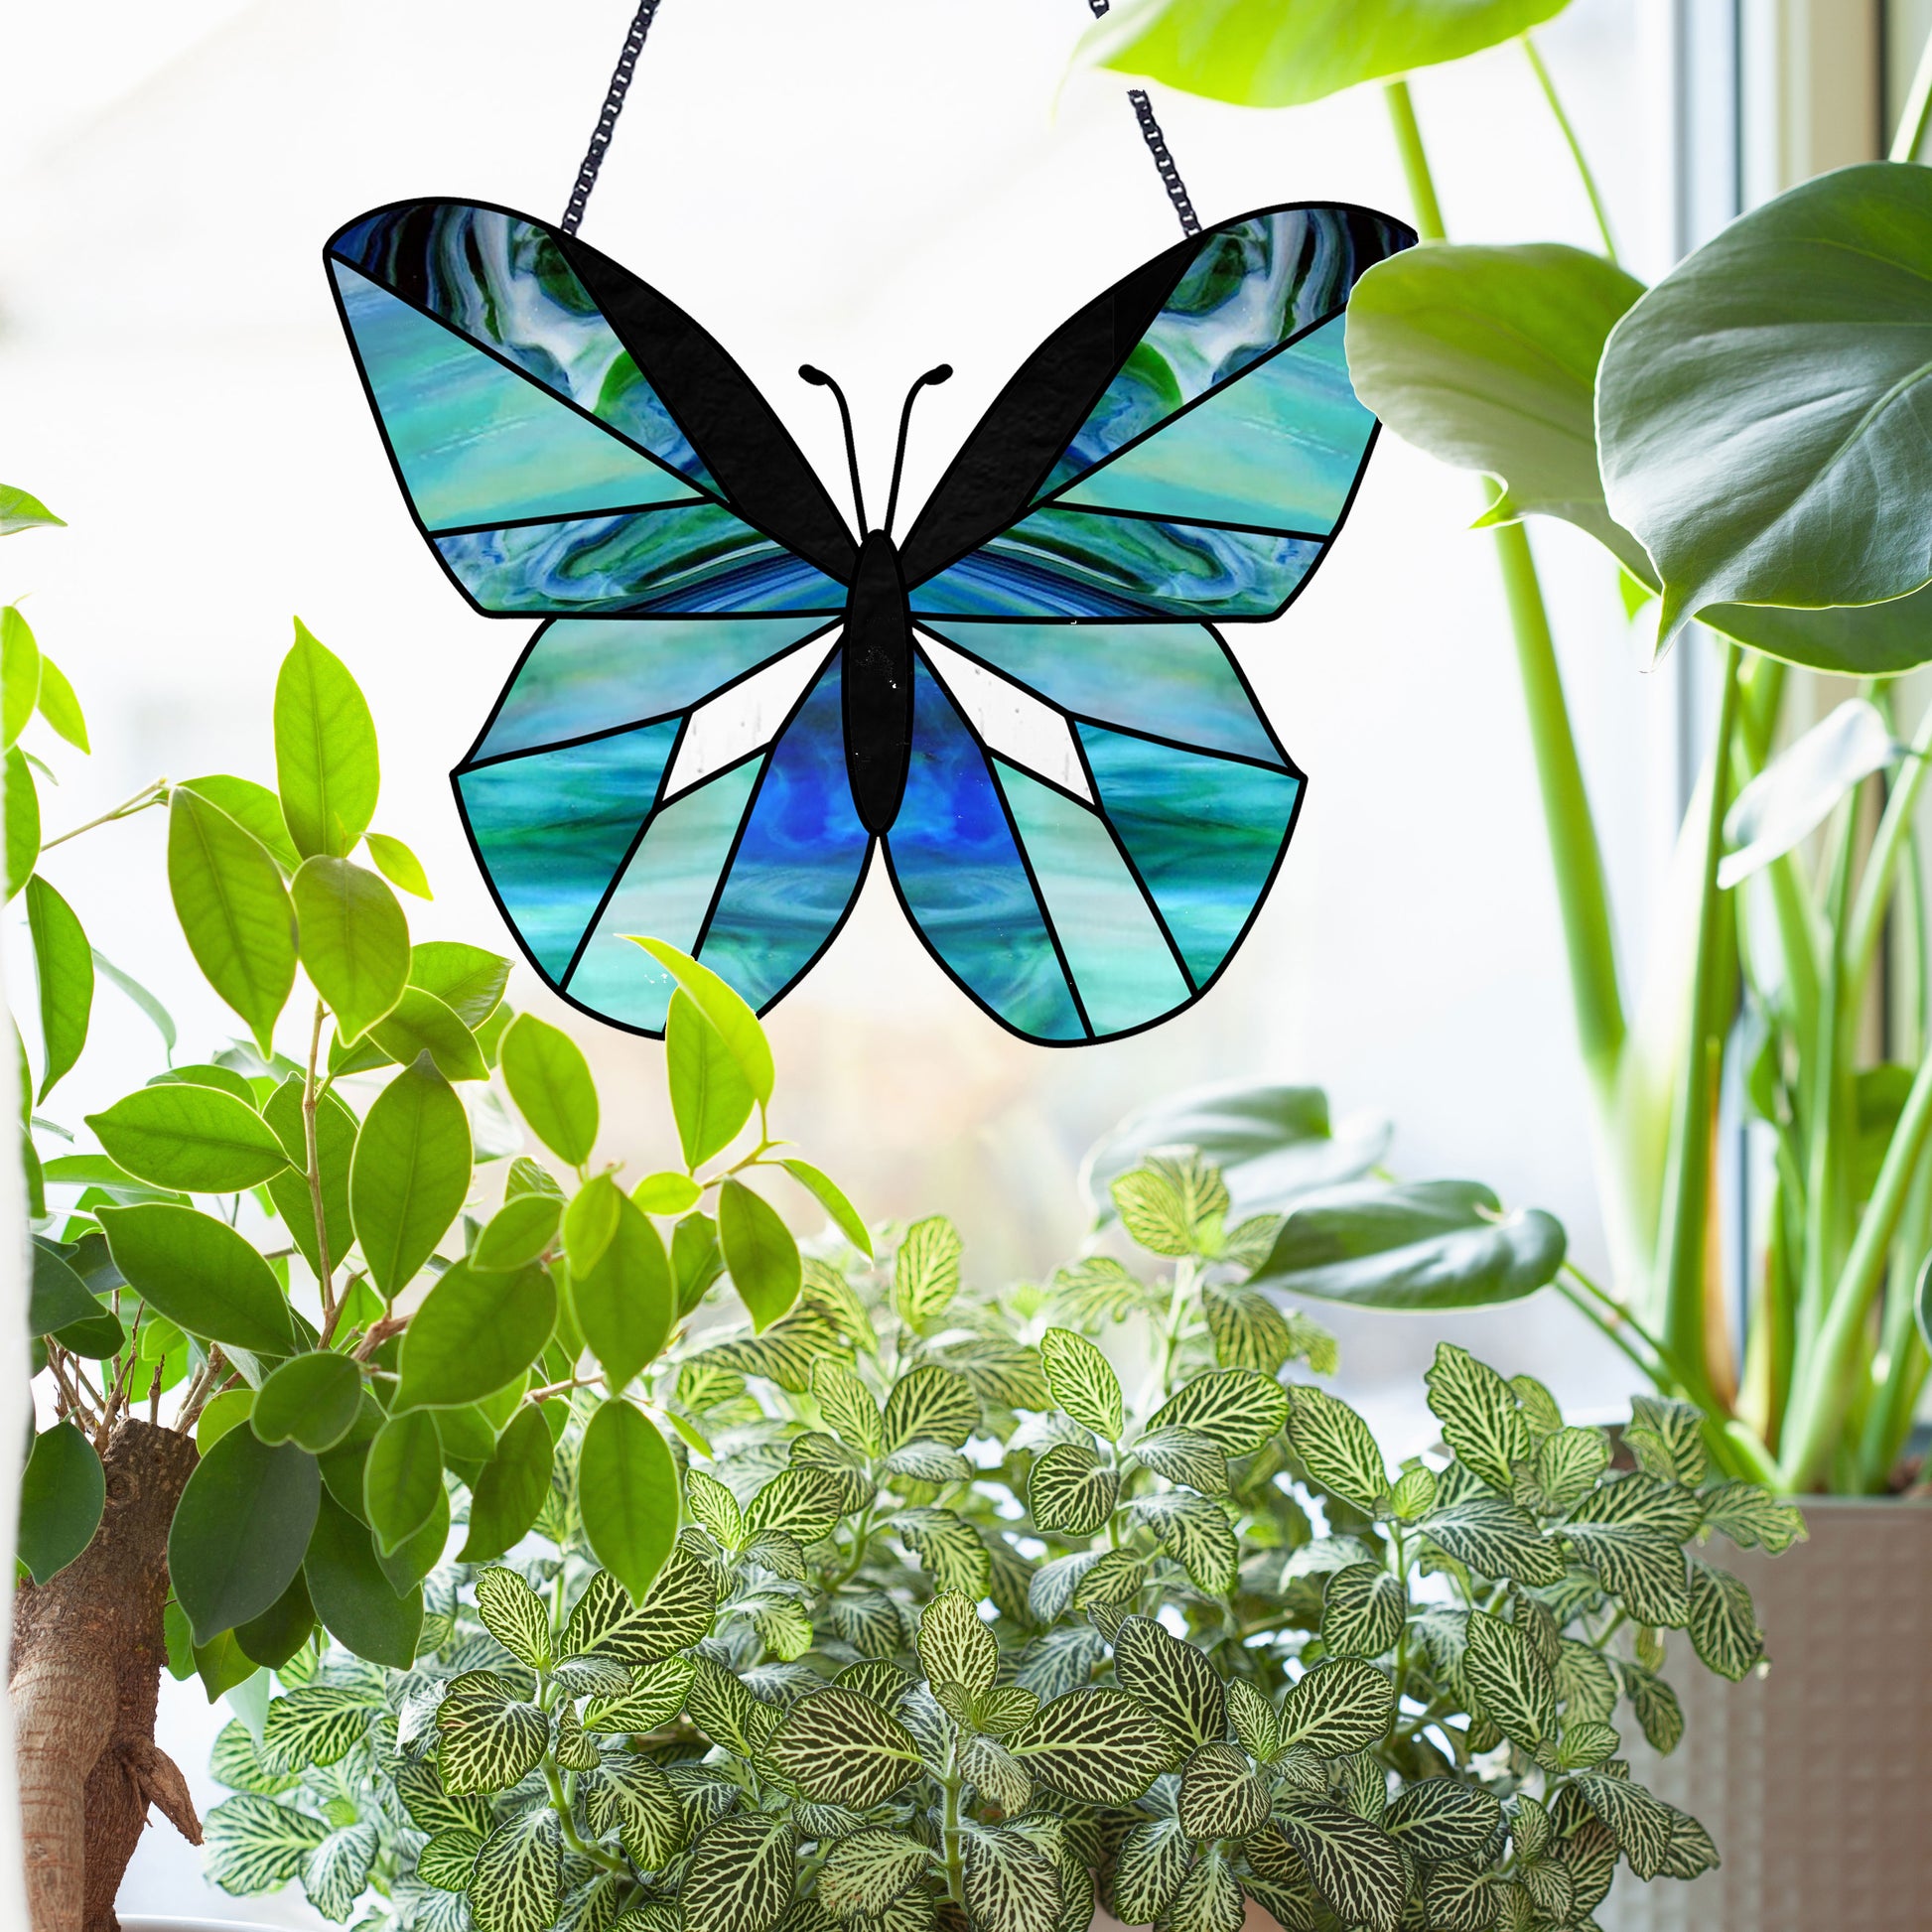 Beginner stained glass pattern for a butterfly, instant PDF download, shown hanging in a window with plants